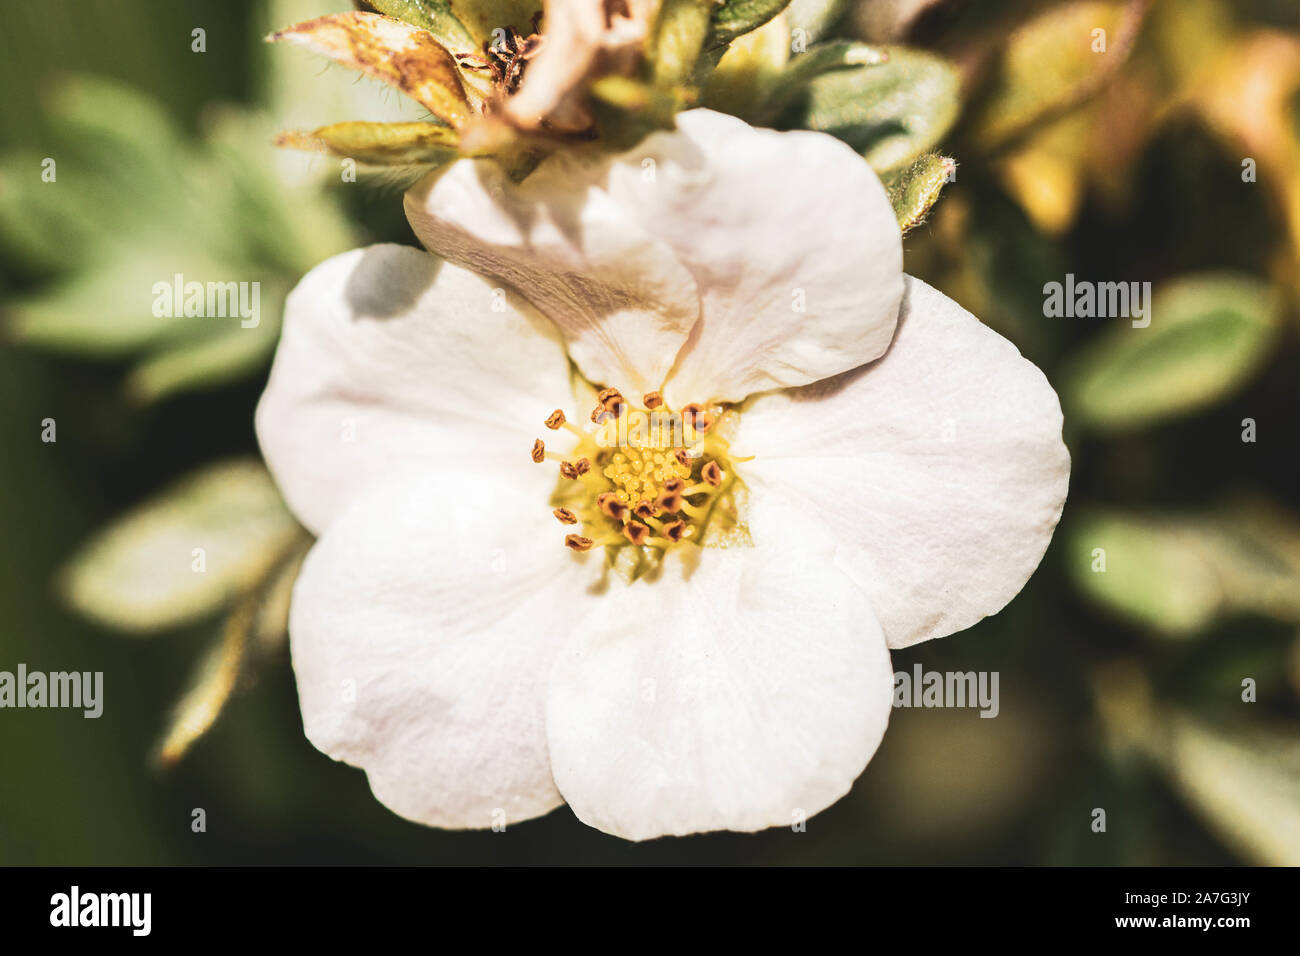 Details of a Beautiful White Autumn Flower in Bloom Stock Photo